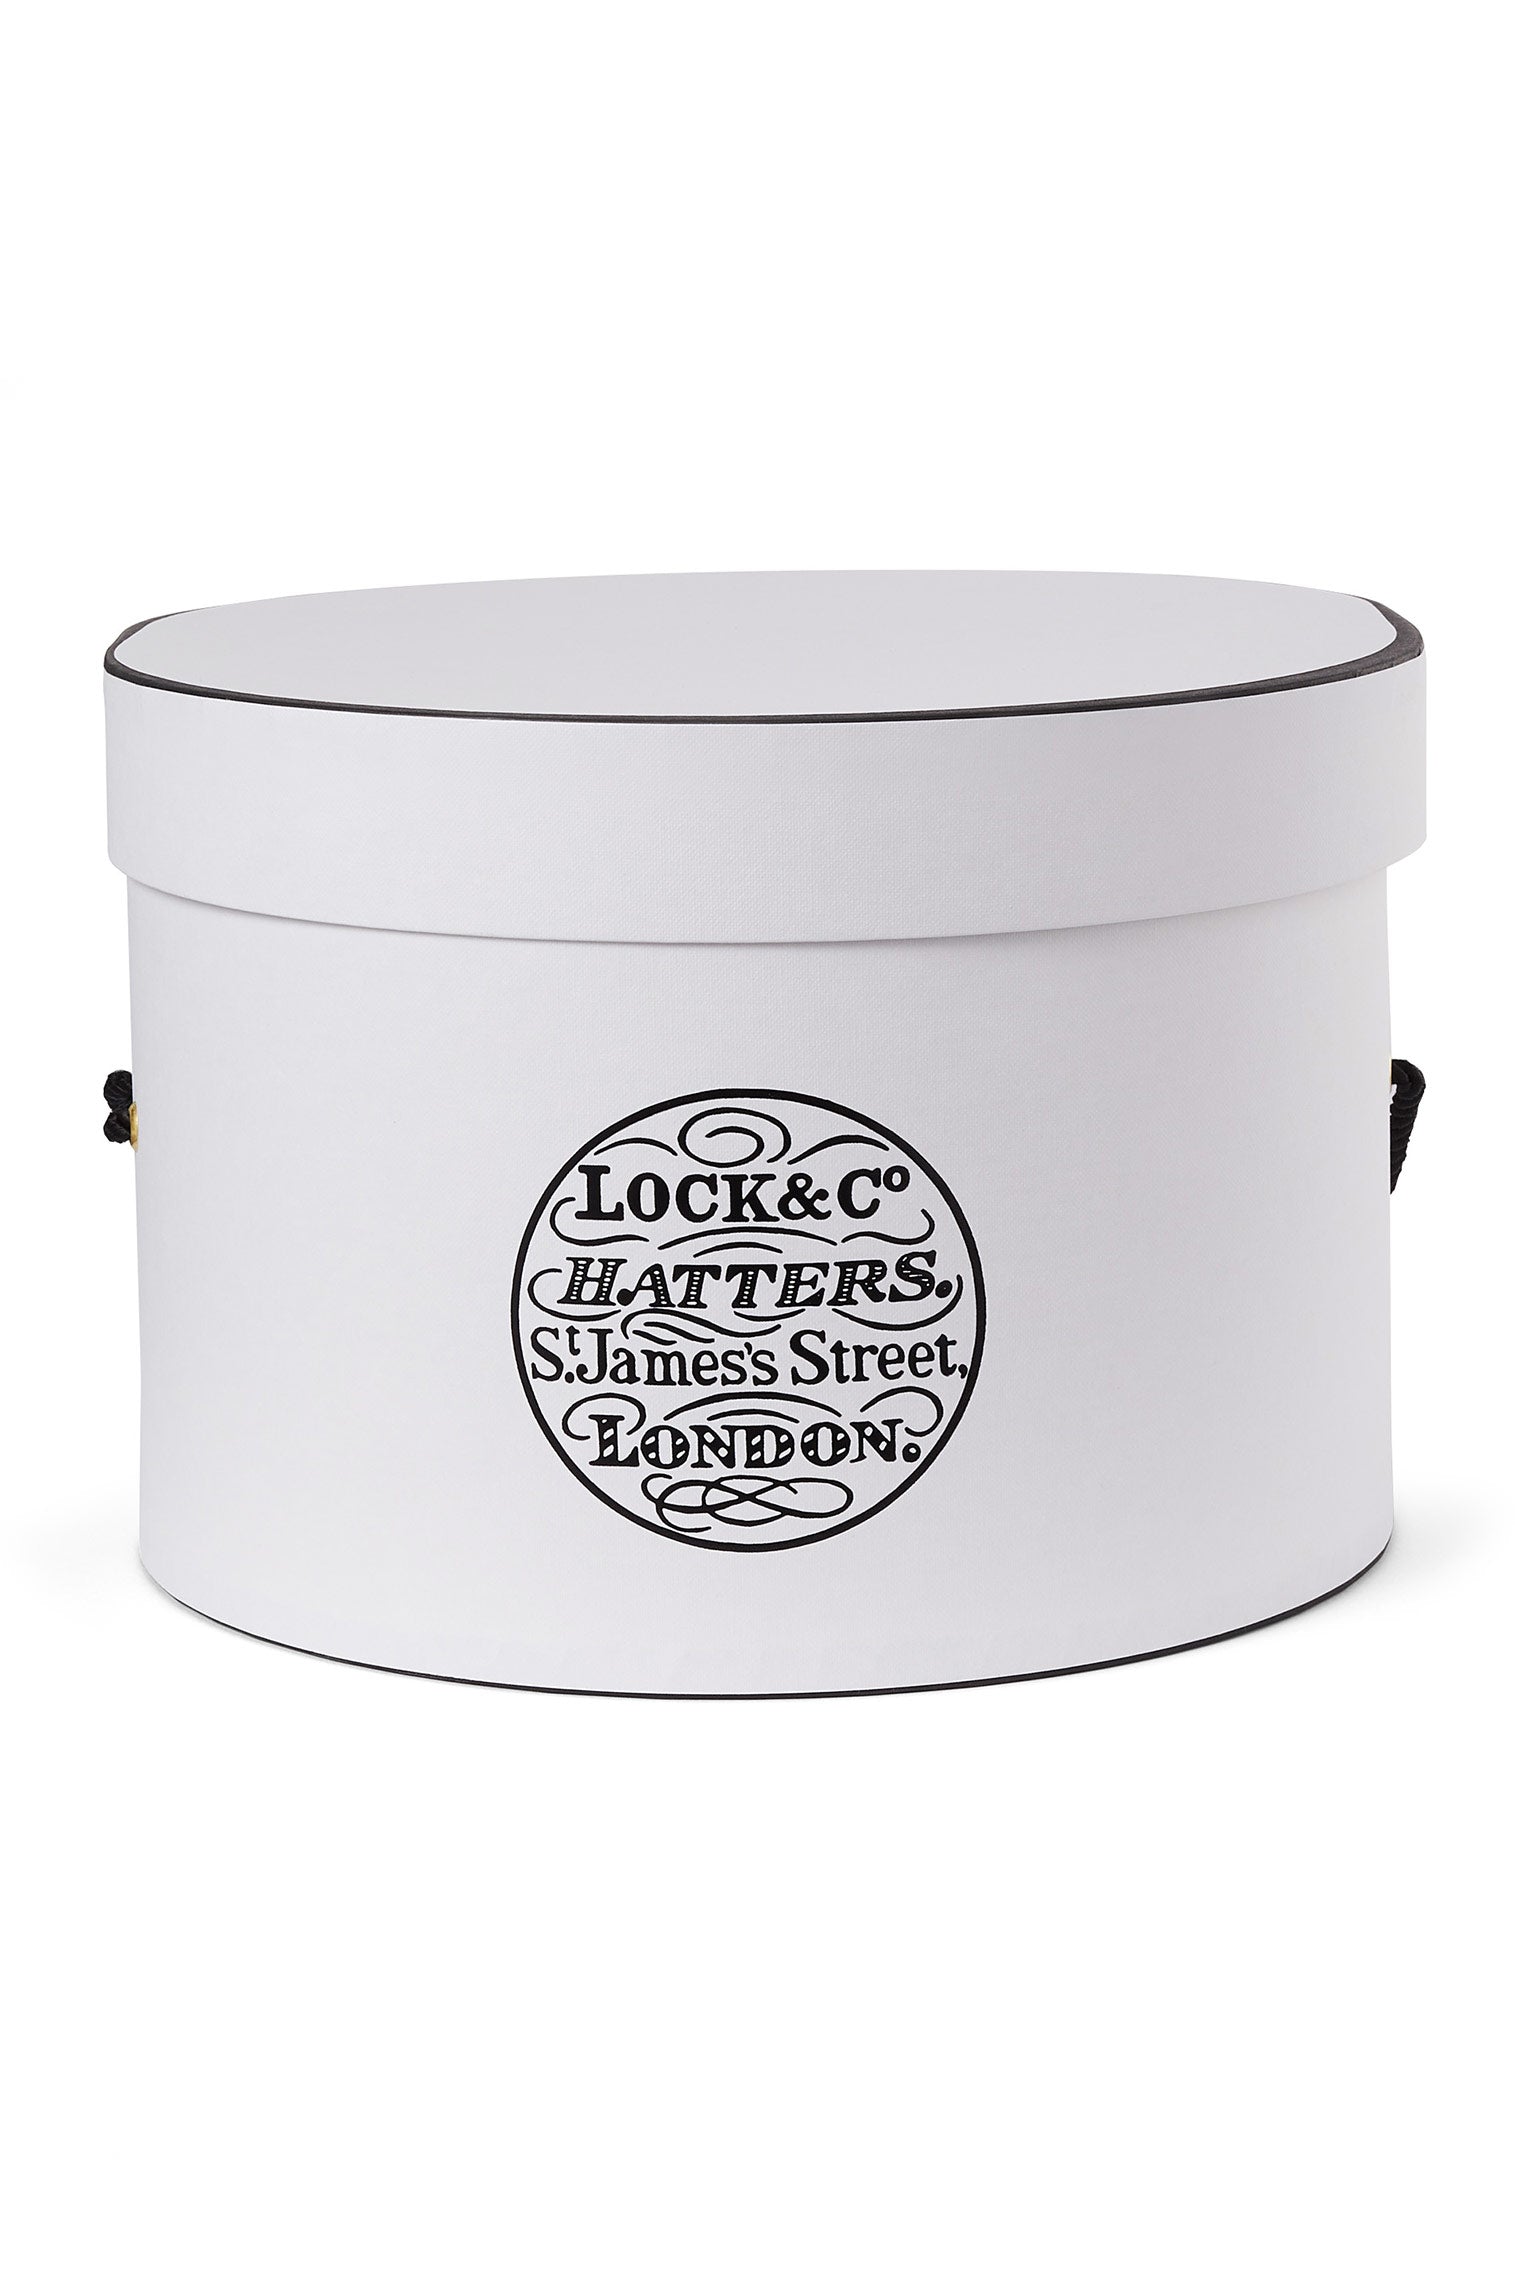 Hat Box Small - Products - Lock & Co. Hatters London UK